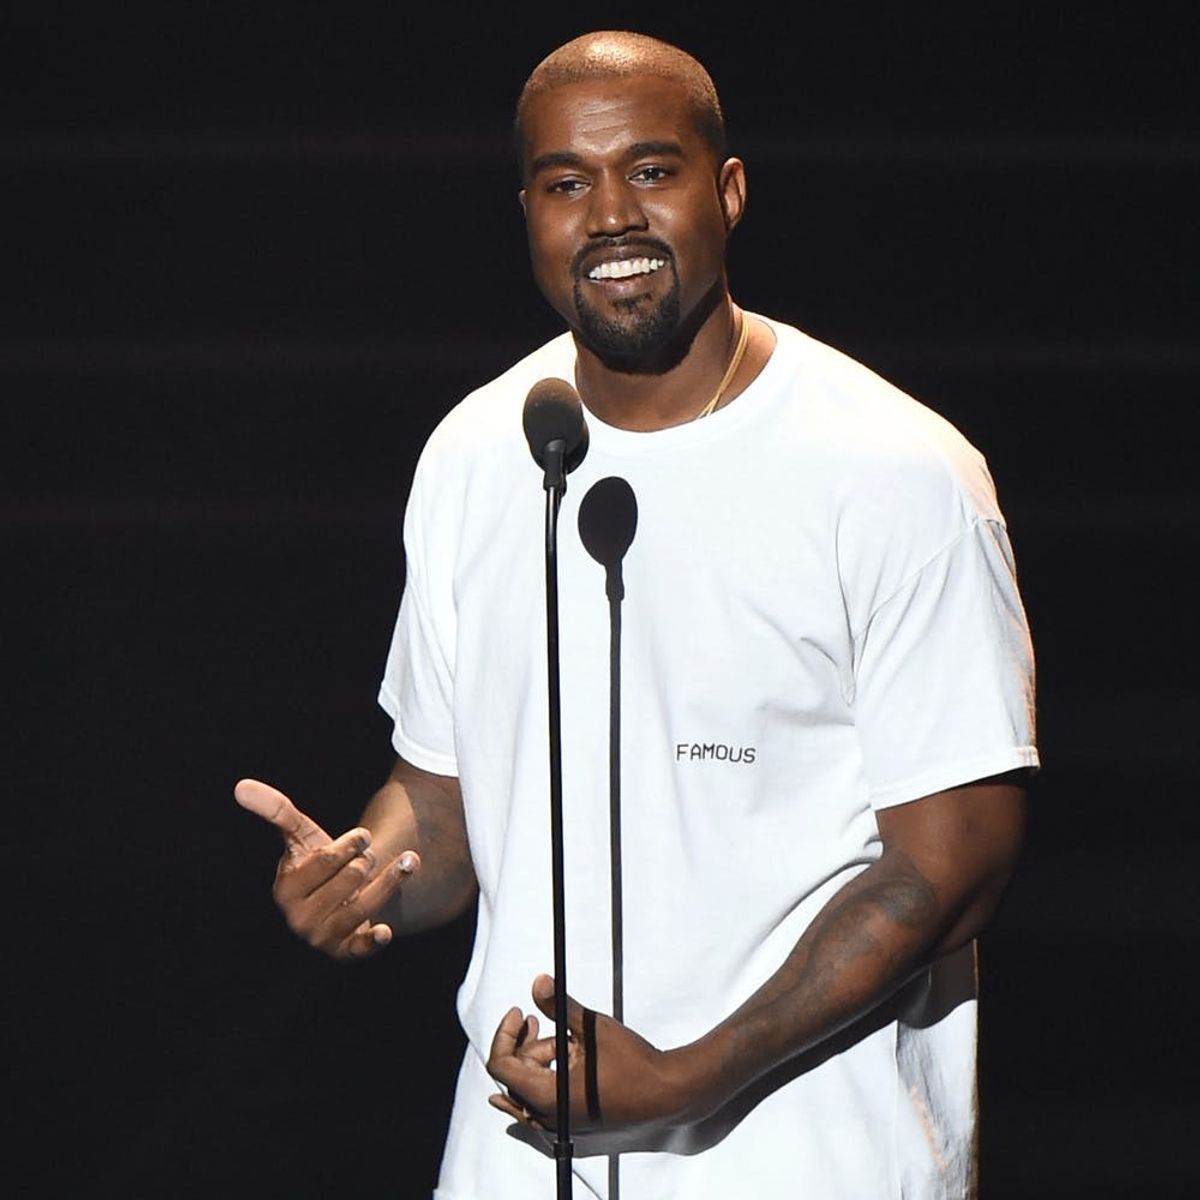 Kanye West Is Making Moves to Launch a Makeup Line